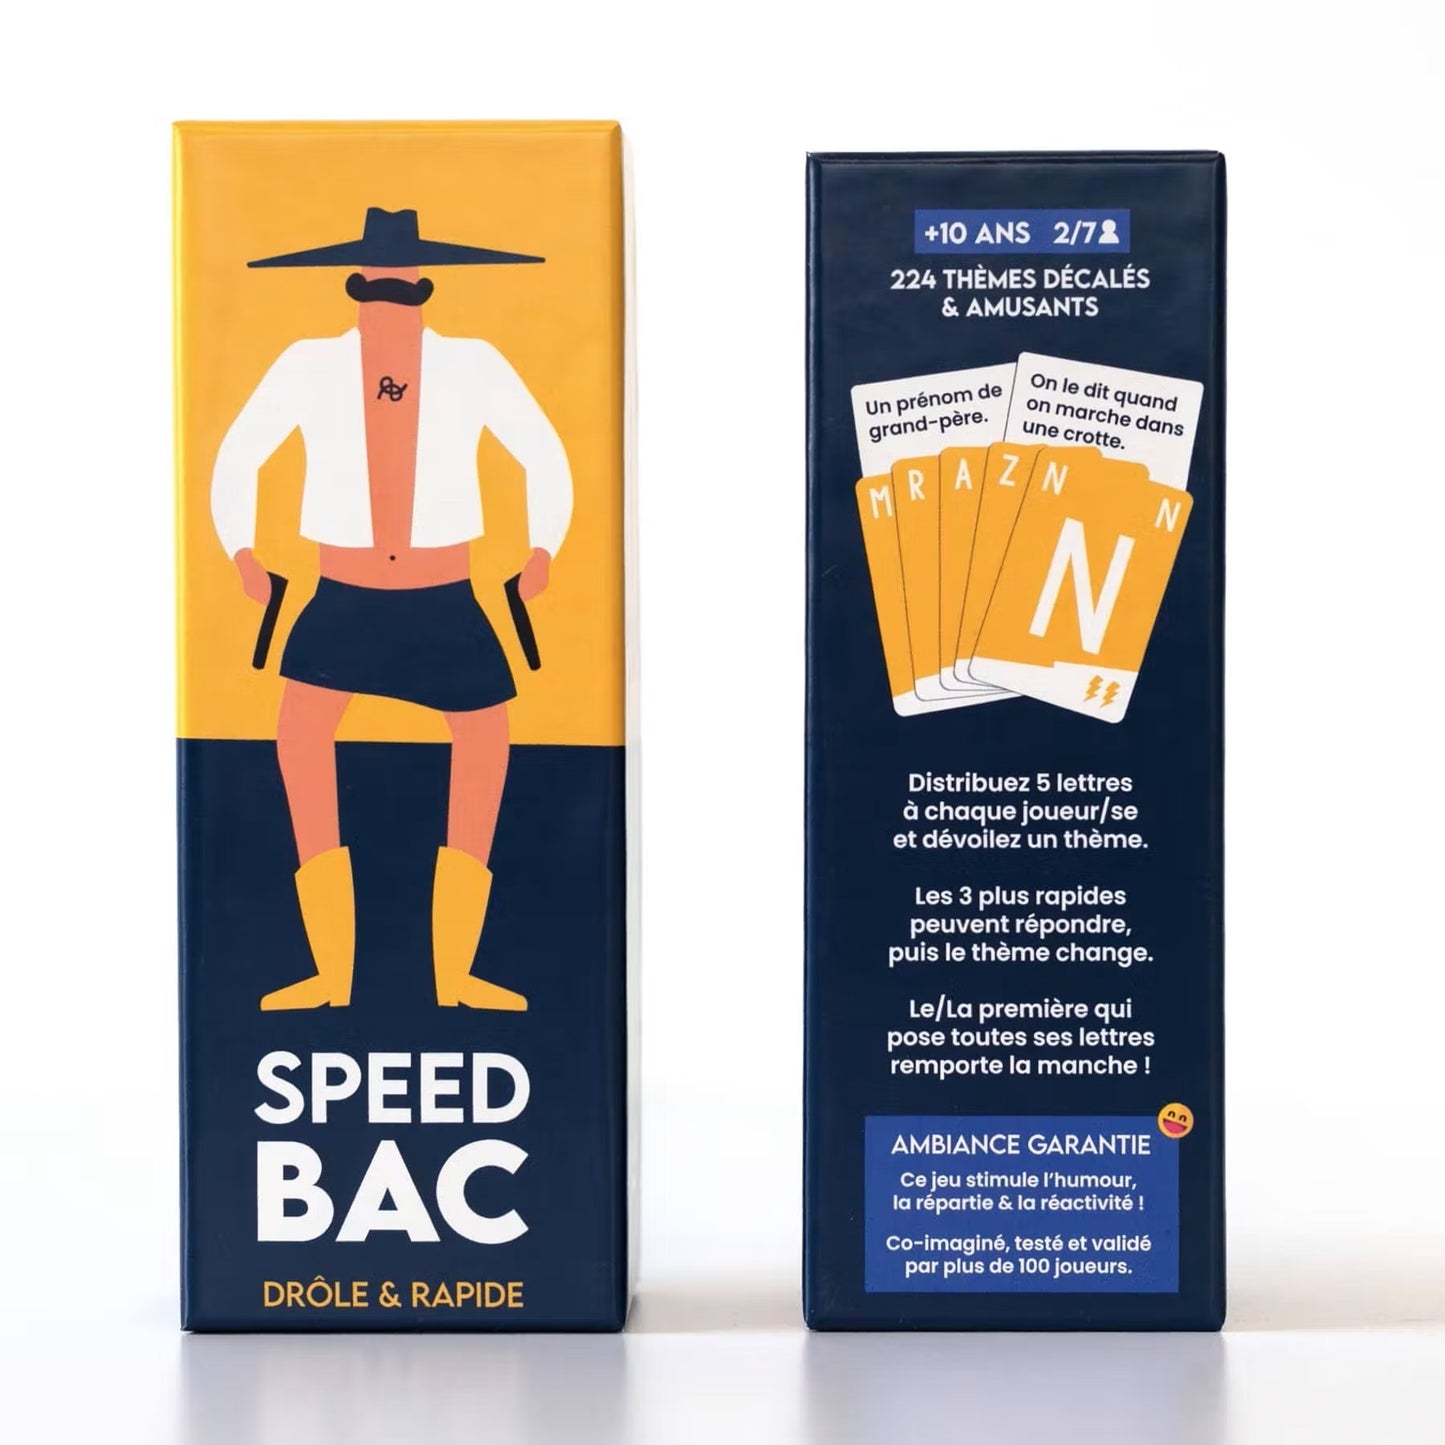 Party game | Speedbac | Yellow version